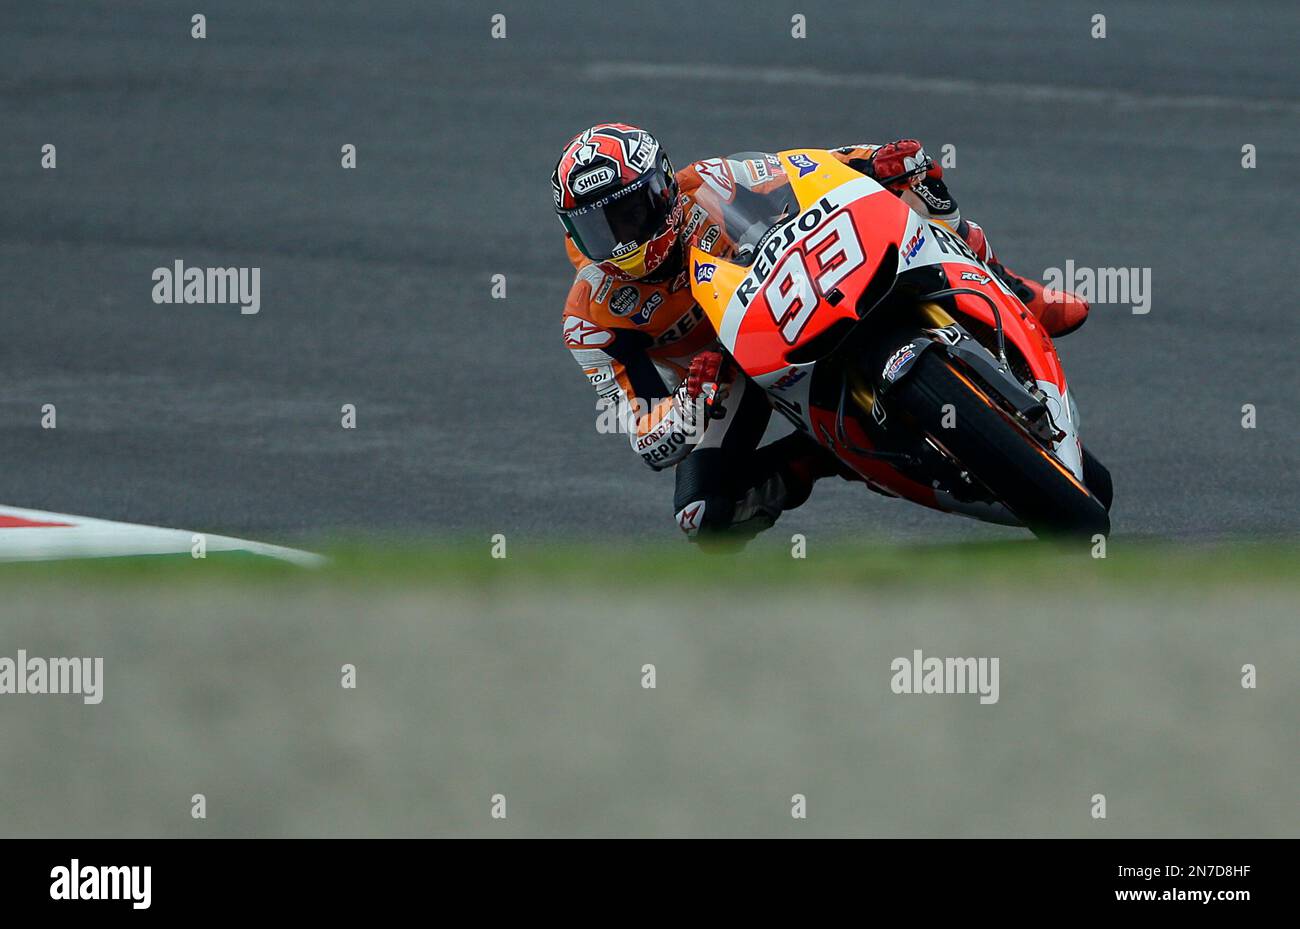 Spain's Marc Marquez takes a curve with his Honda during the free practice  session for Sunday's Italian Moto GP, at the Mugello race circuit, in  Scarperia, Italy, Friday, May 31, 2013. (AP